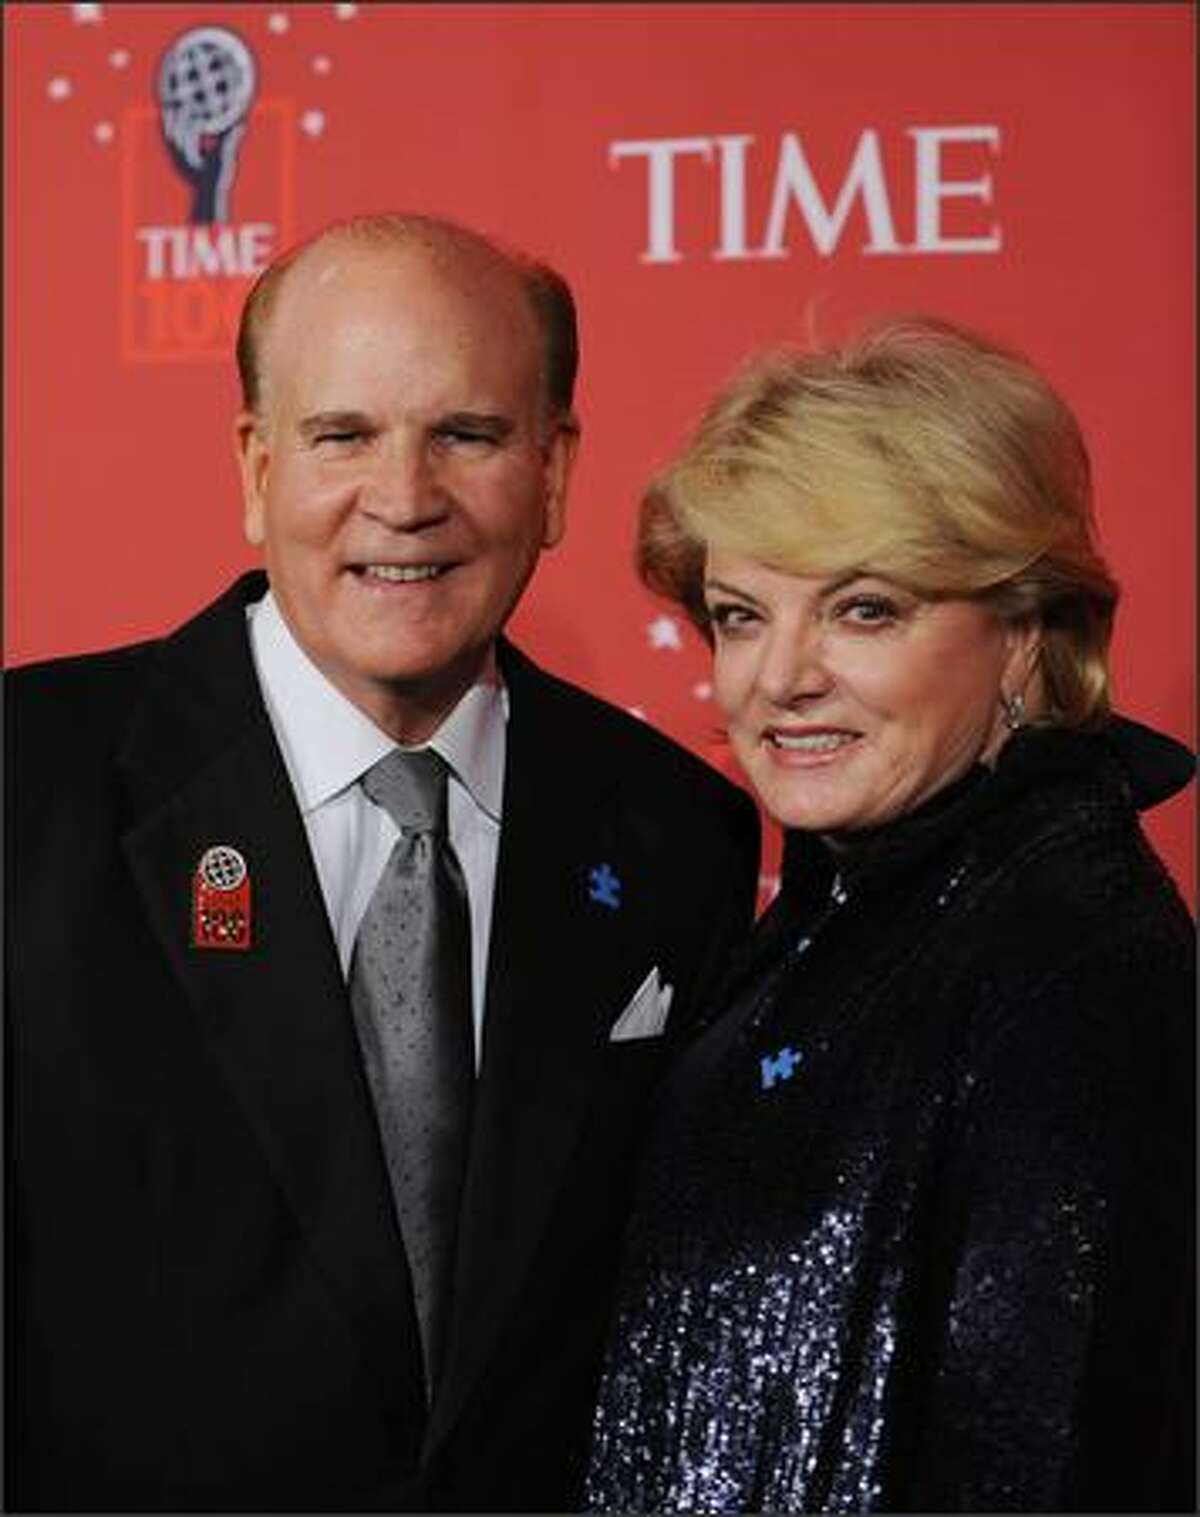 Bob Wright, Vice Chairman of General Electric, and his wife Suzanne Wright arrive. The Wrights are 2008 honorees as founders of "Autism Speaks."